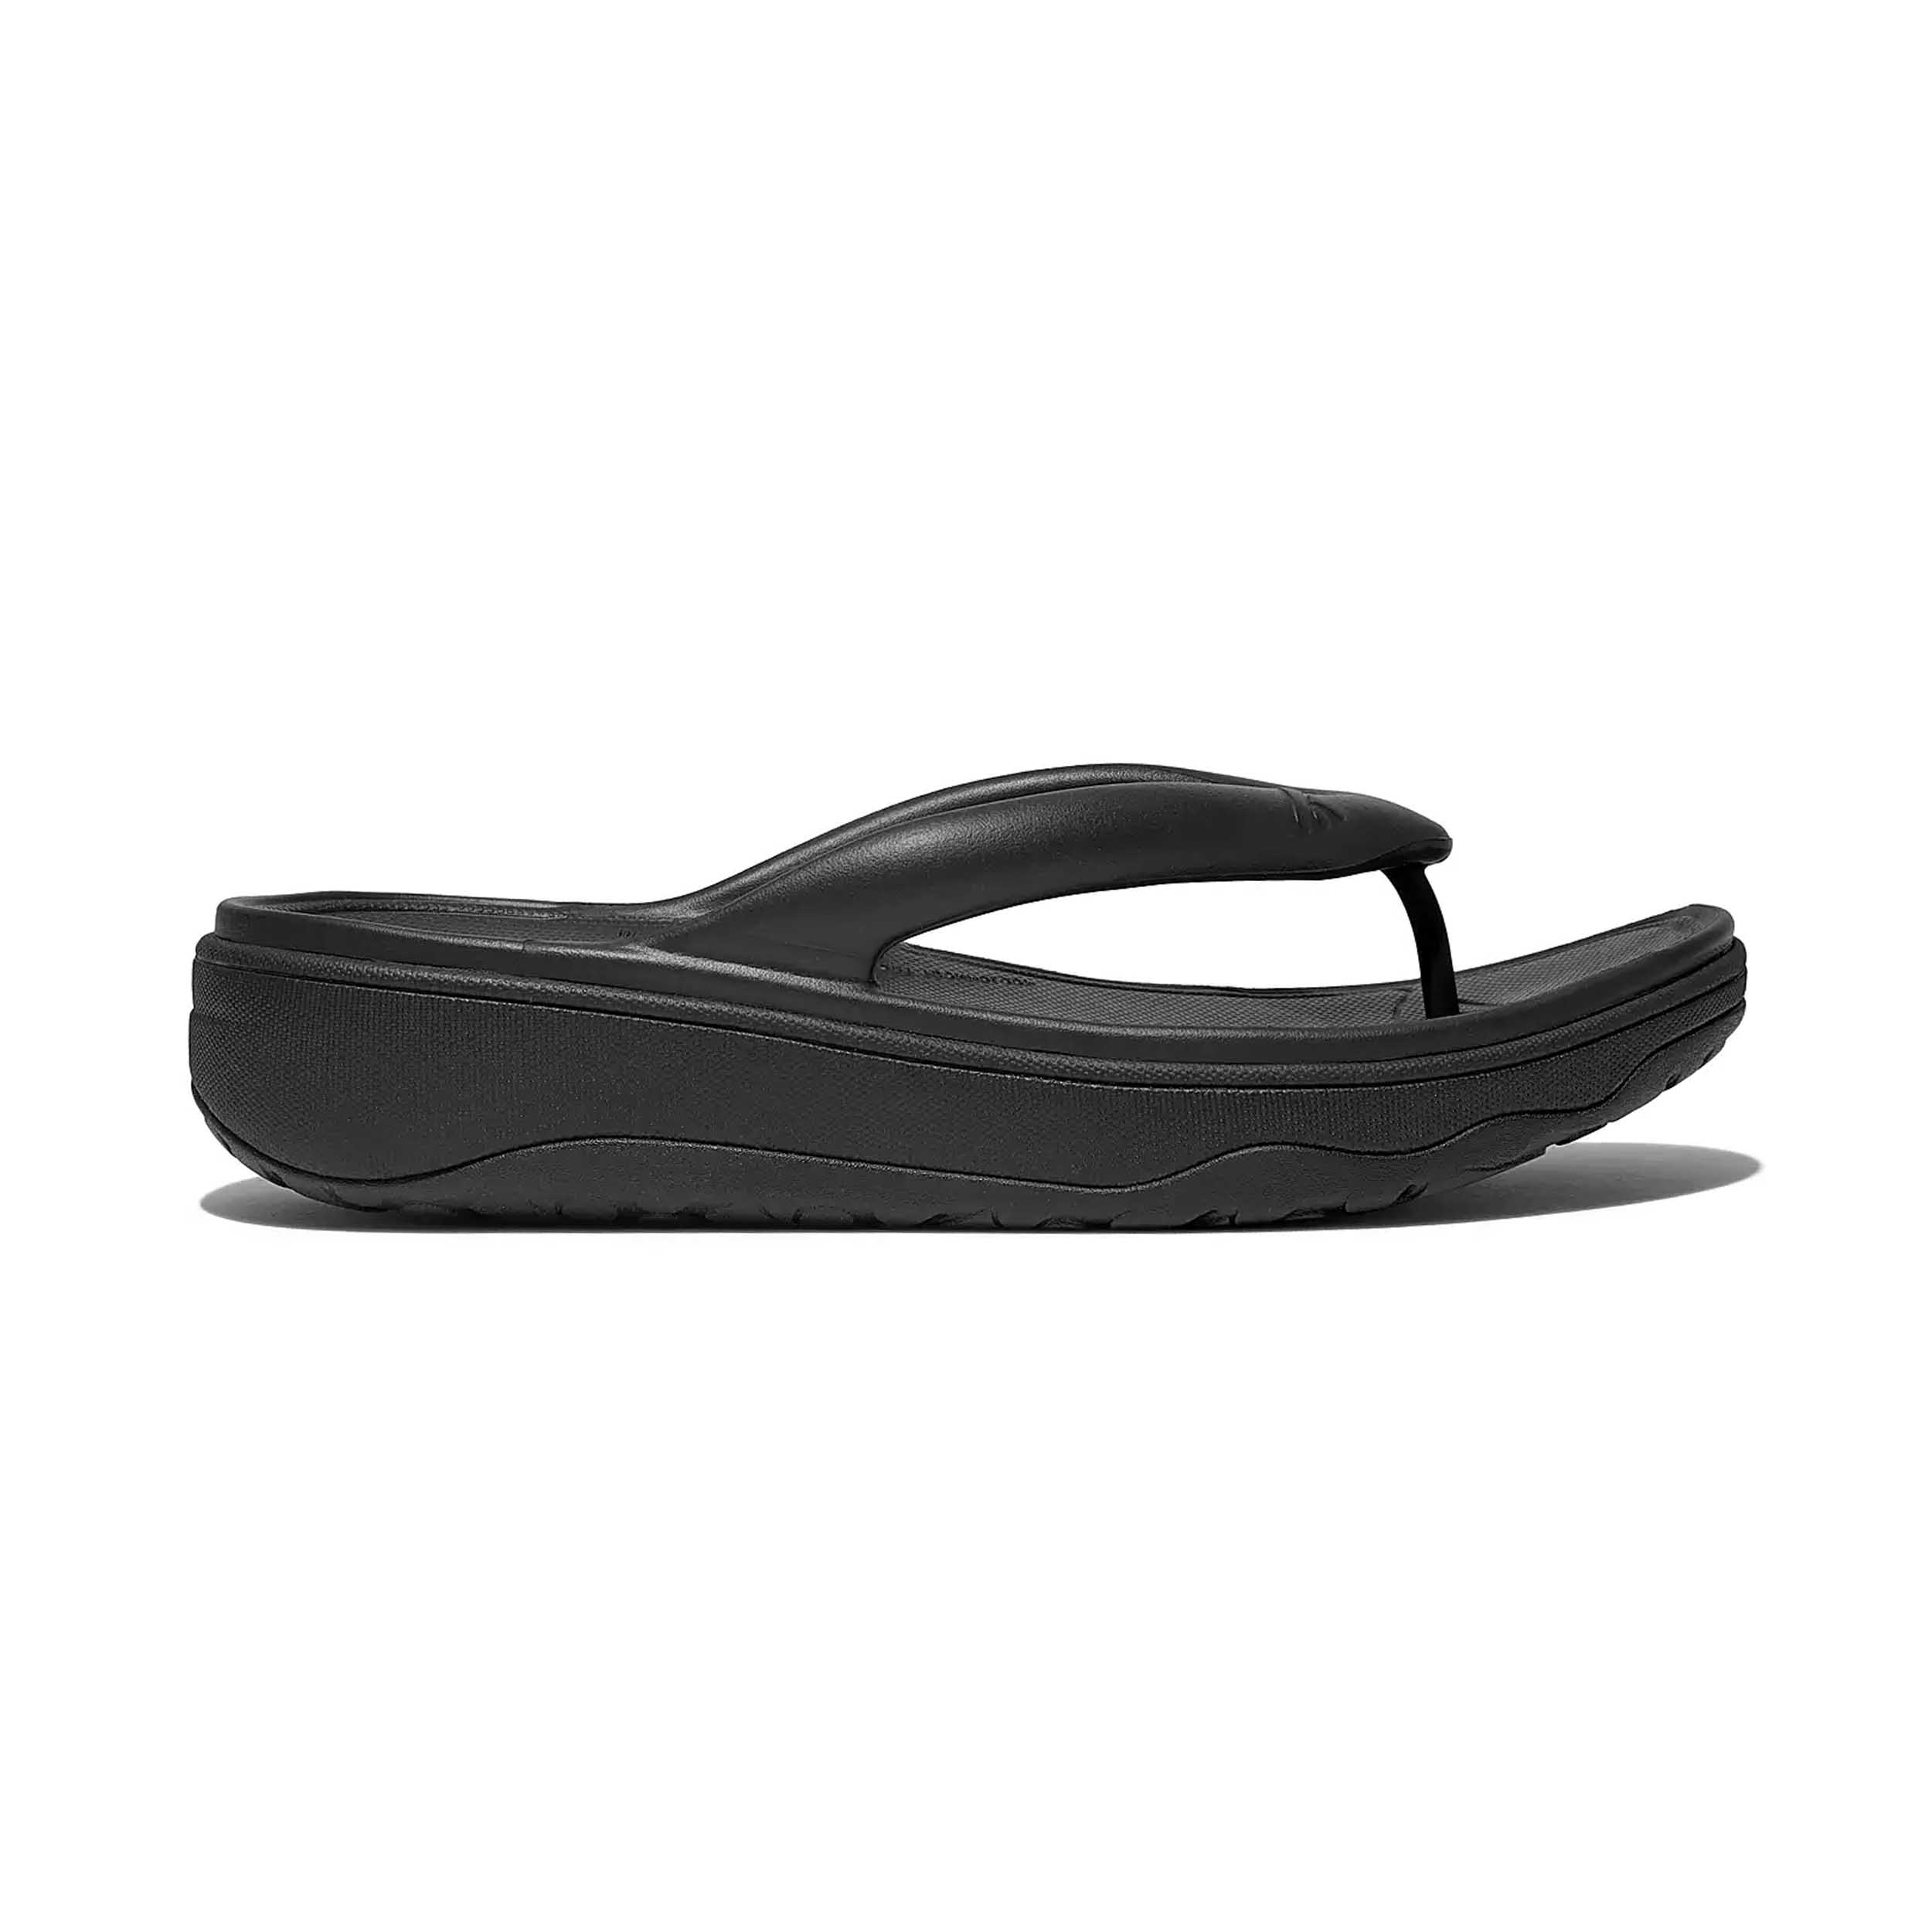 FitFlop HF4 Slipper Relieff Metallic Recovery Black